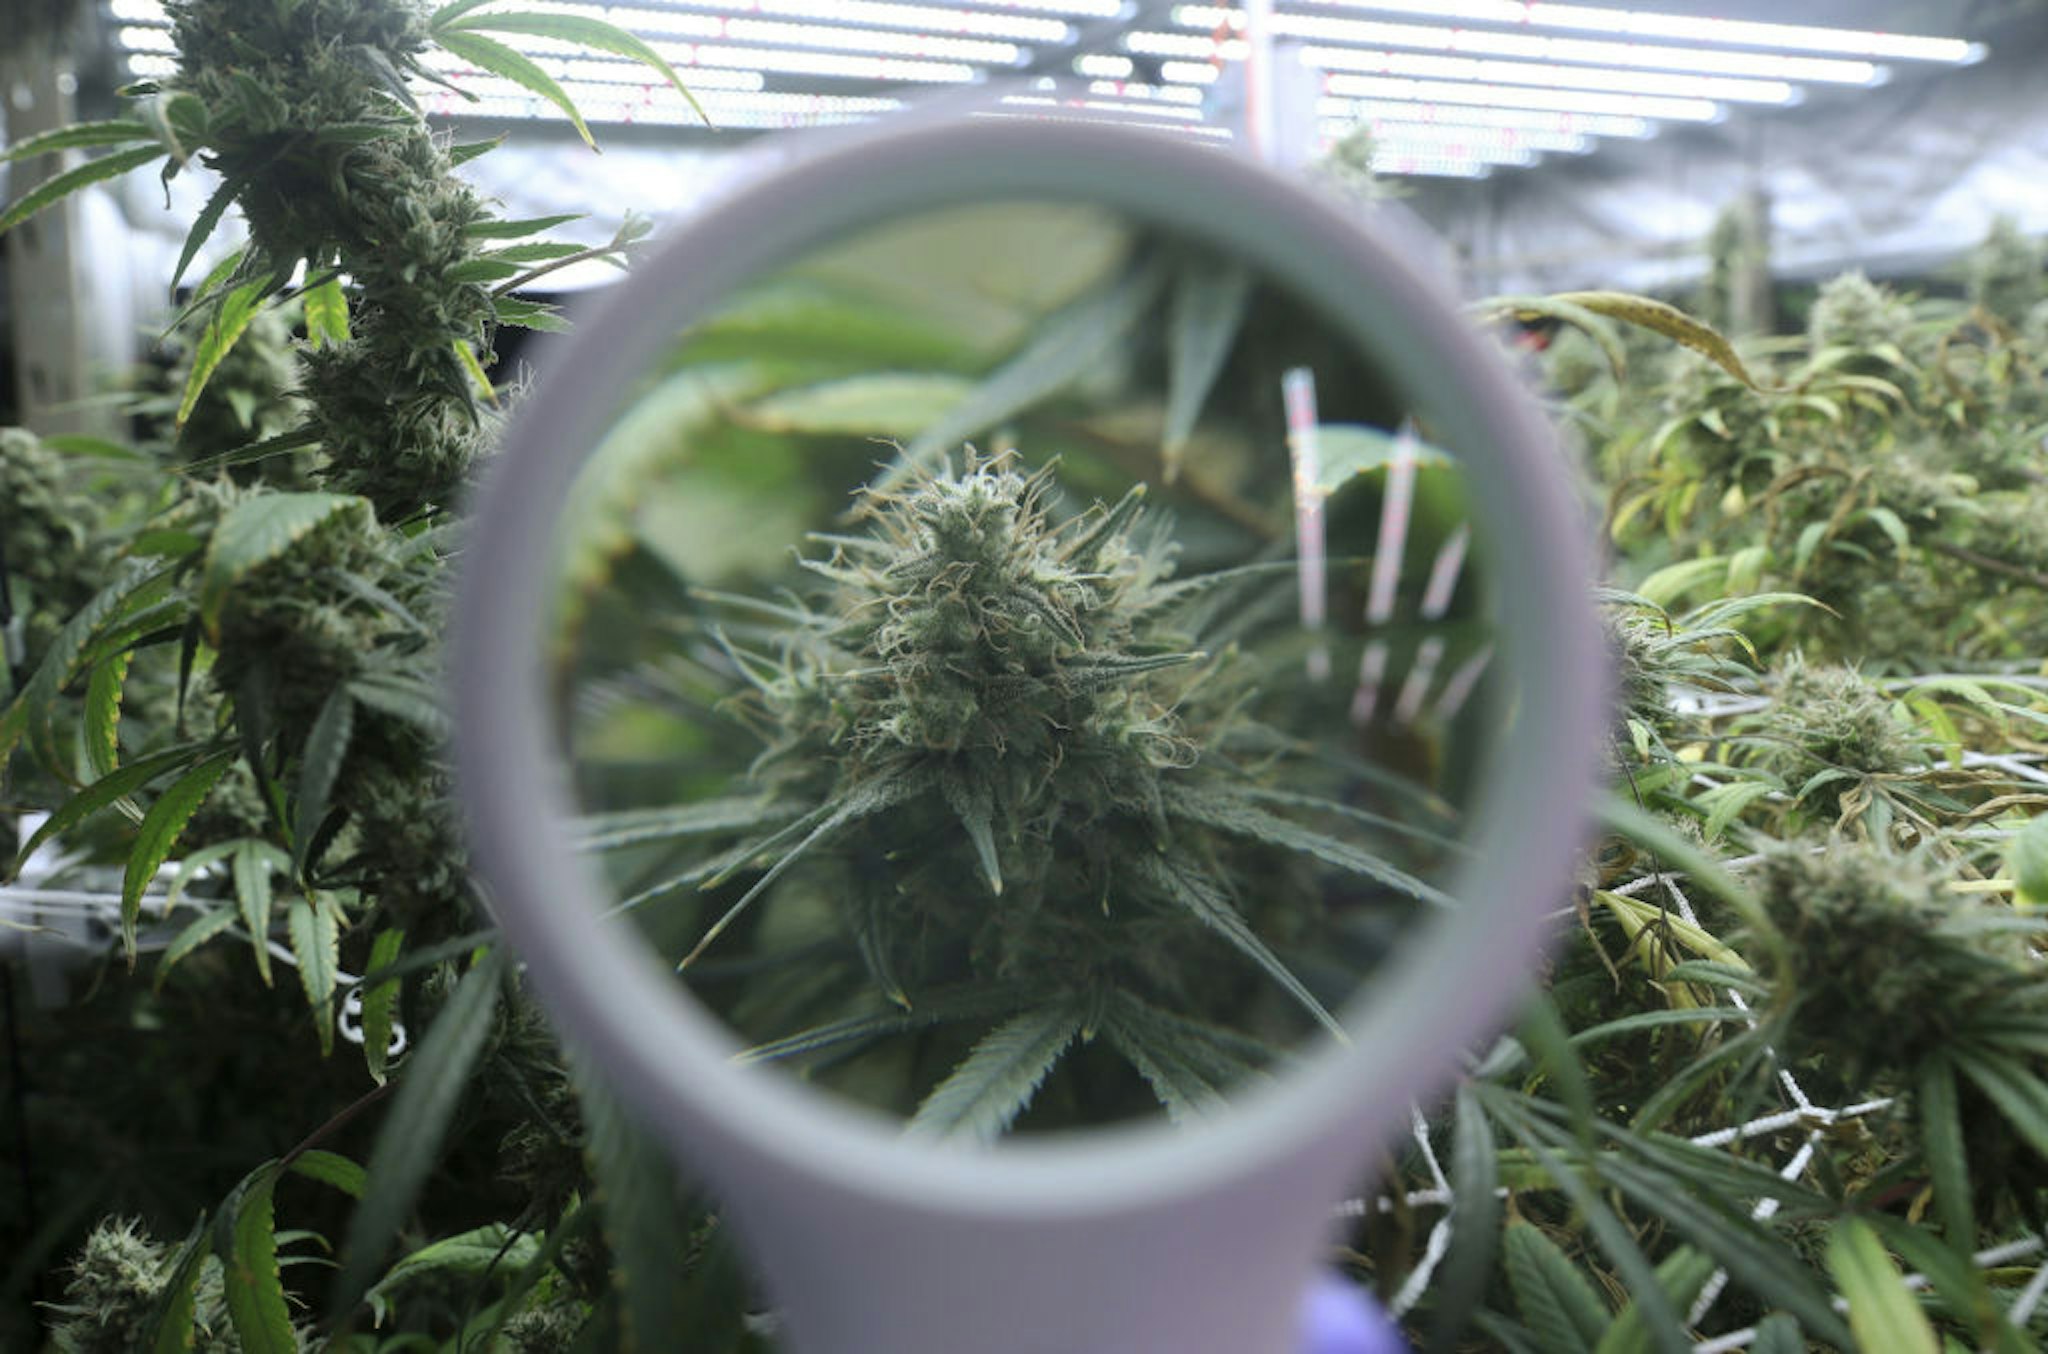 A flowering cannabis plant is seen through a magnifying glass at a tour called &quot;Chitiva,&quot; given by workers at Prescribd, a cannabis cultivation company, at one of its cultivation centers Saturday, July 17, 2021, in Bridgeview, Illinois. The interactive tour shows the start-to-finish process of growing cannabis.